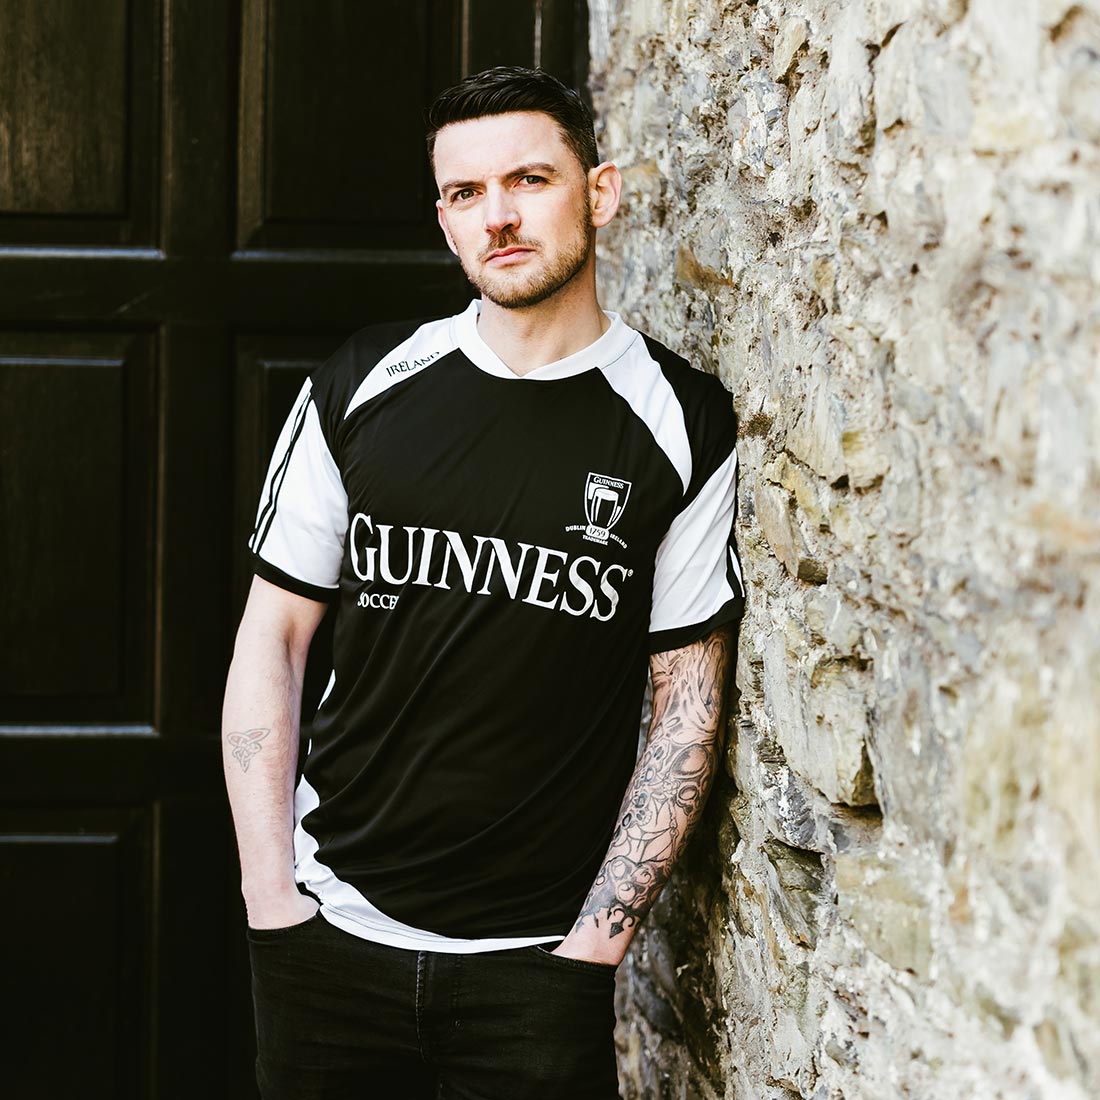 A man in a black and white Guinness® Soccer Jersey leaning against a wall.